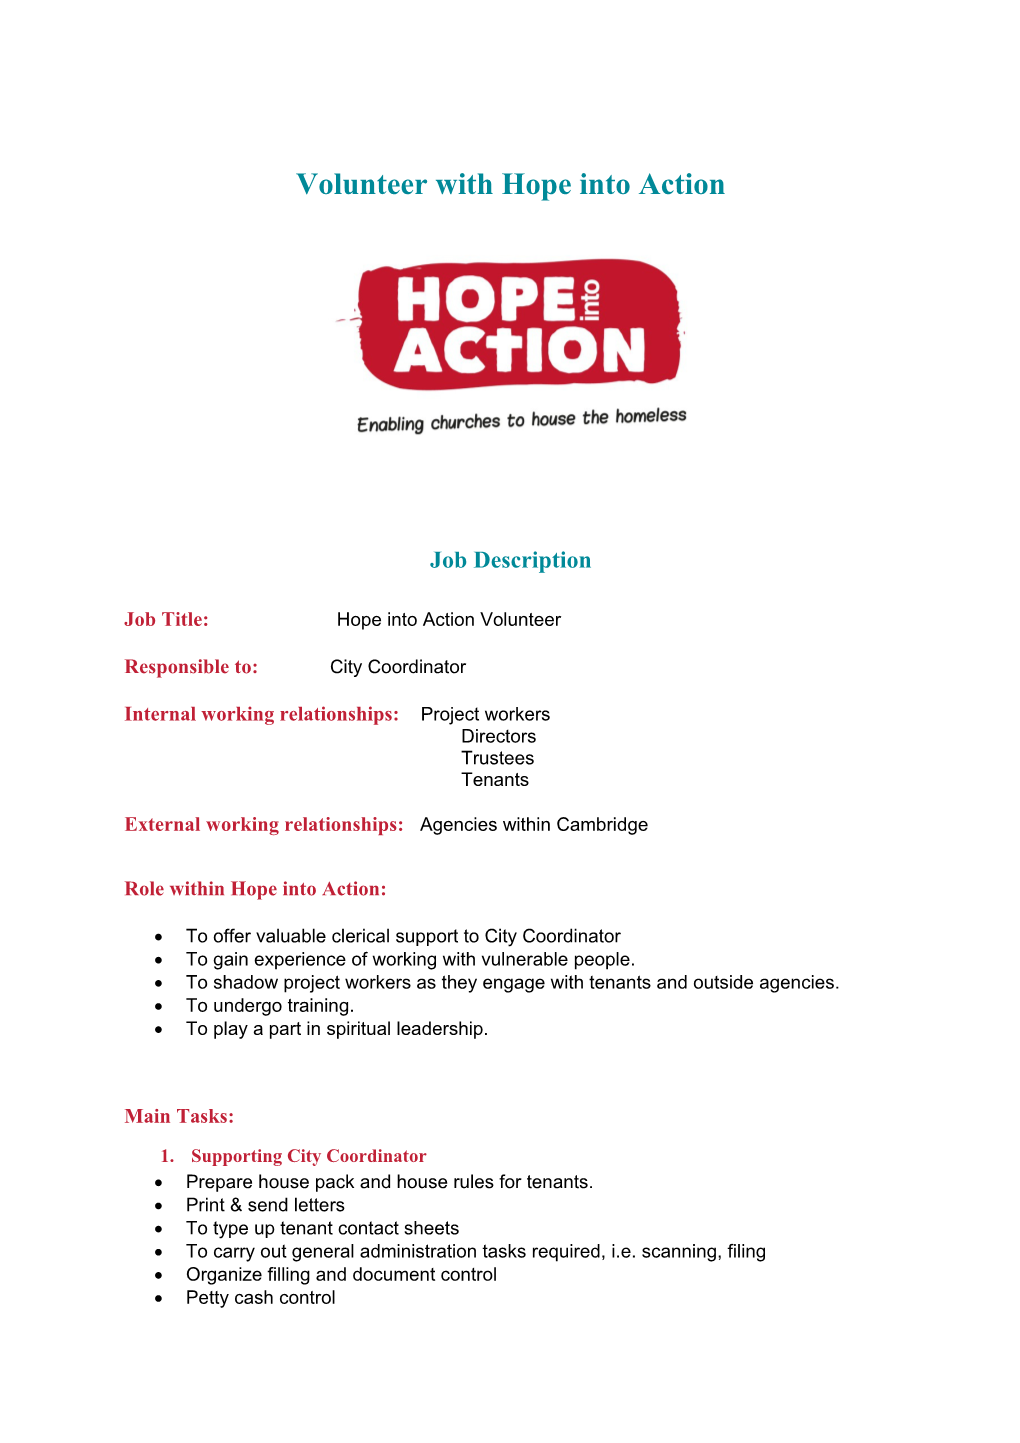 Volunteer with Hope Into Action